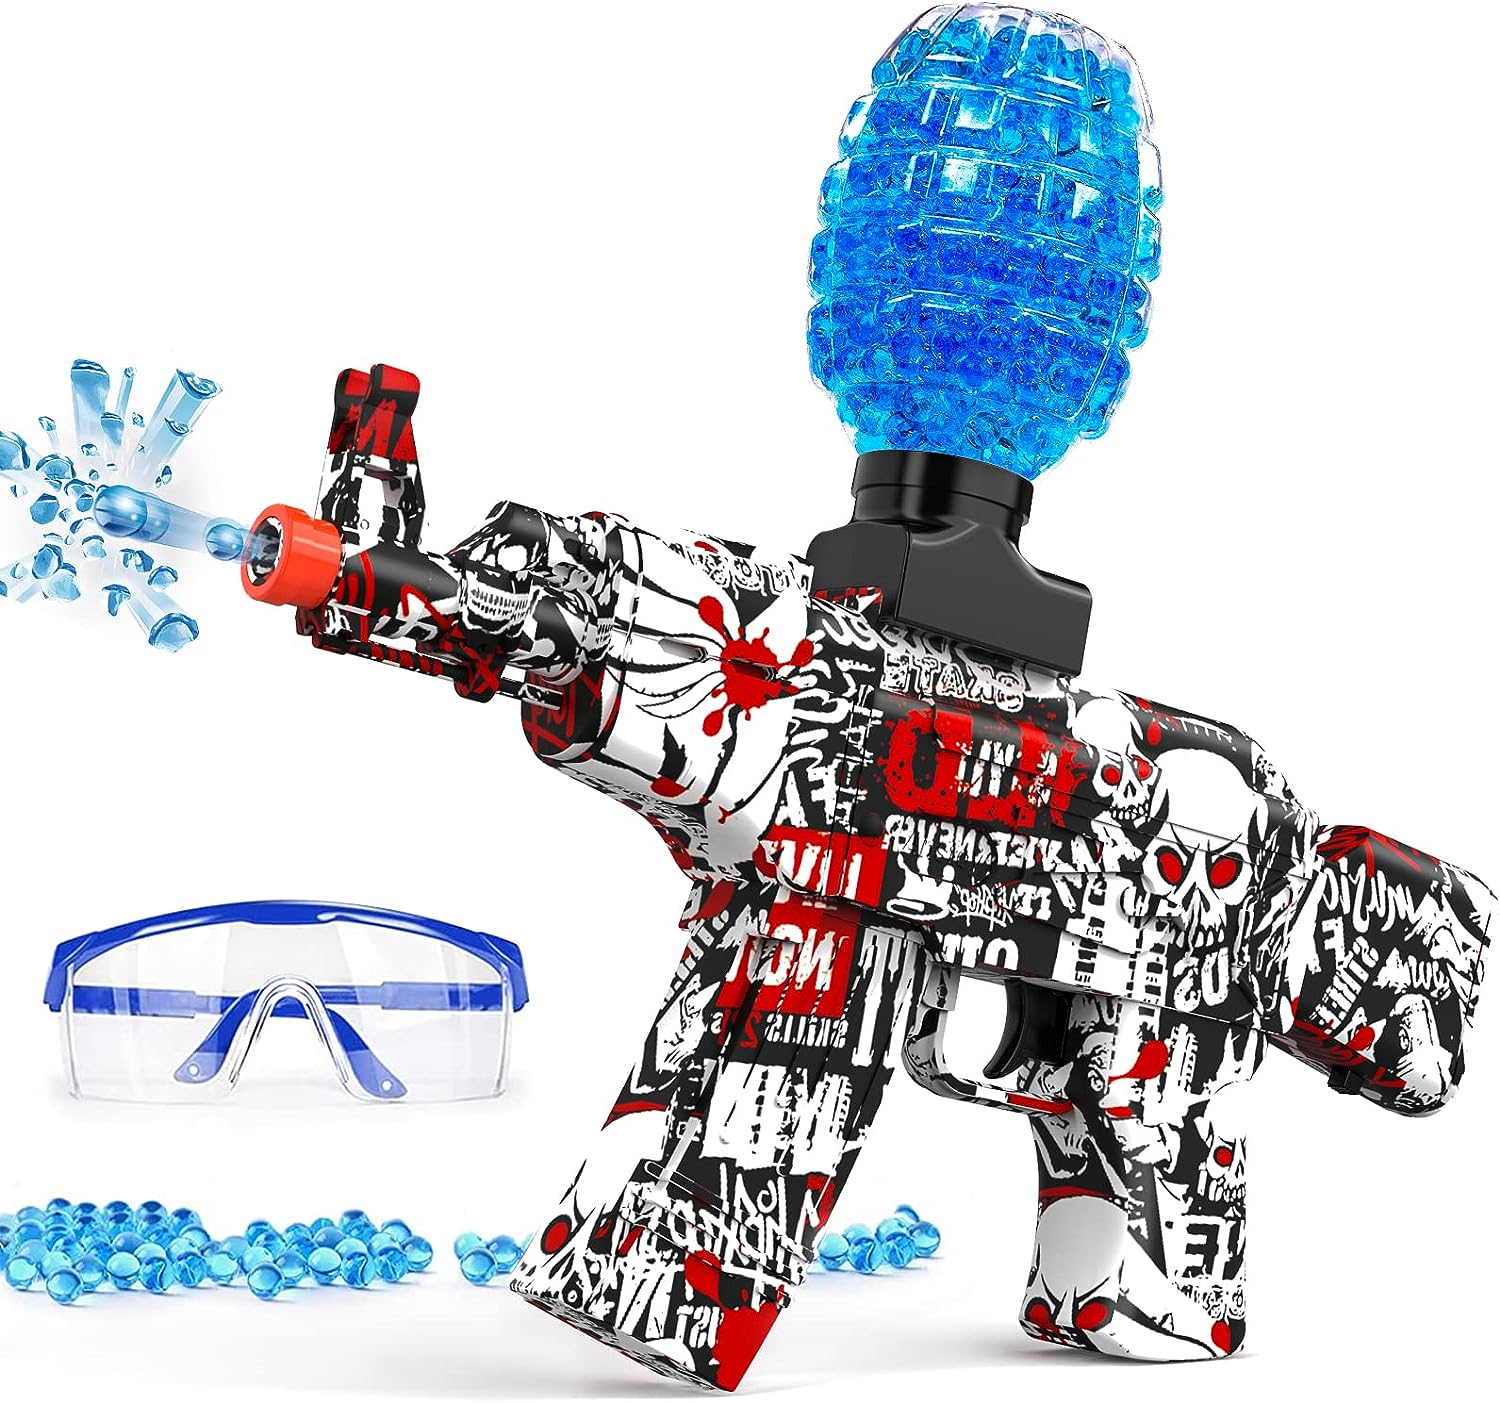 Anstoy Electric AKM-47 Splatter Ball Blaster toy gun with a red and blue design for outdoor shooting activities.